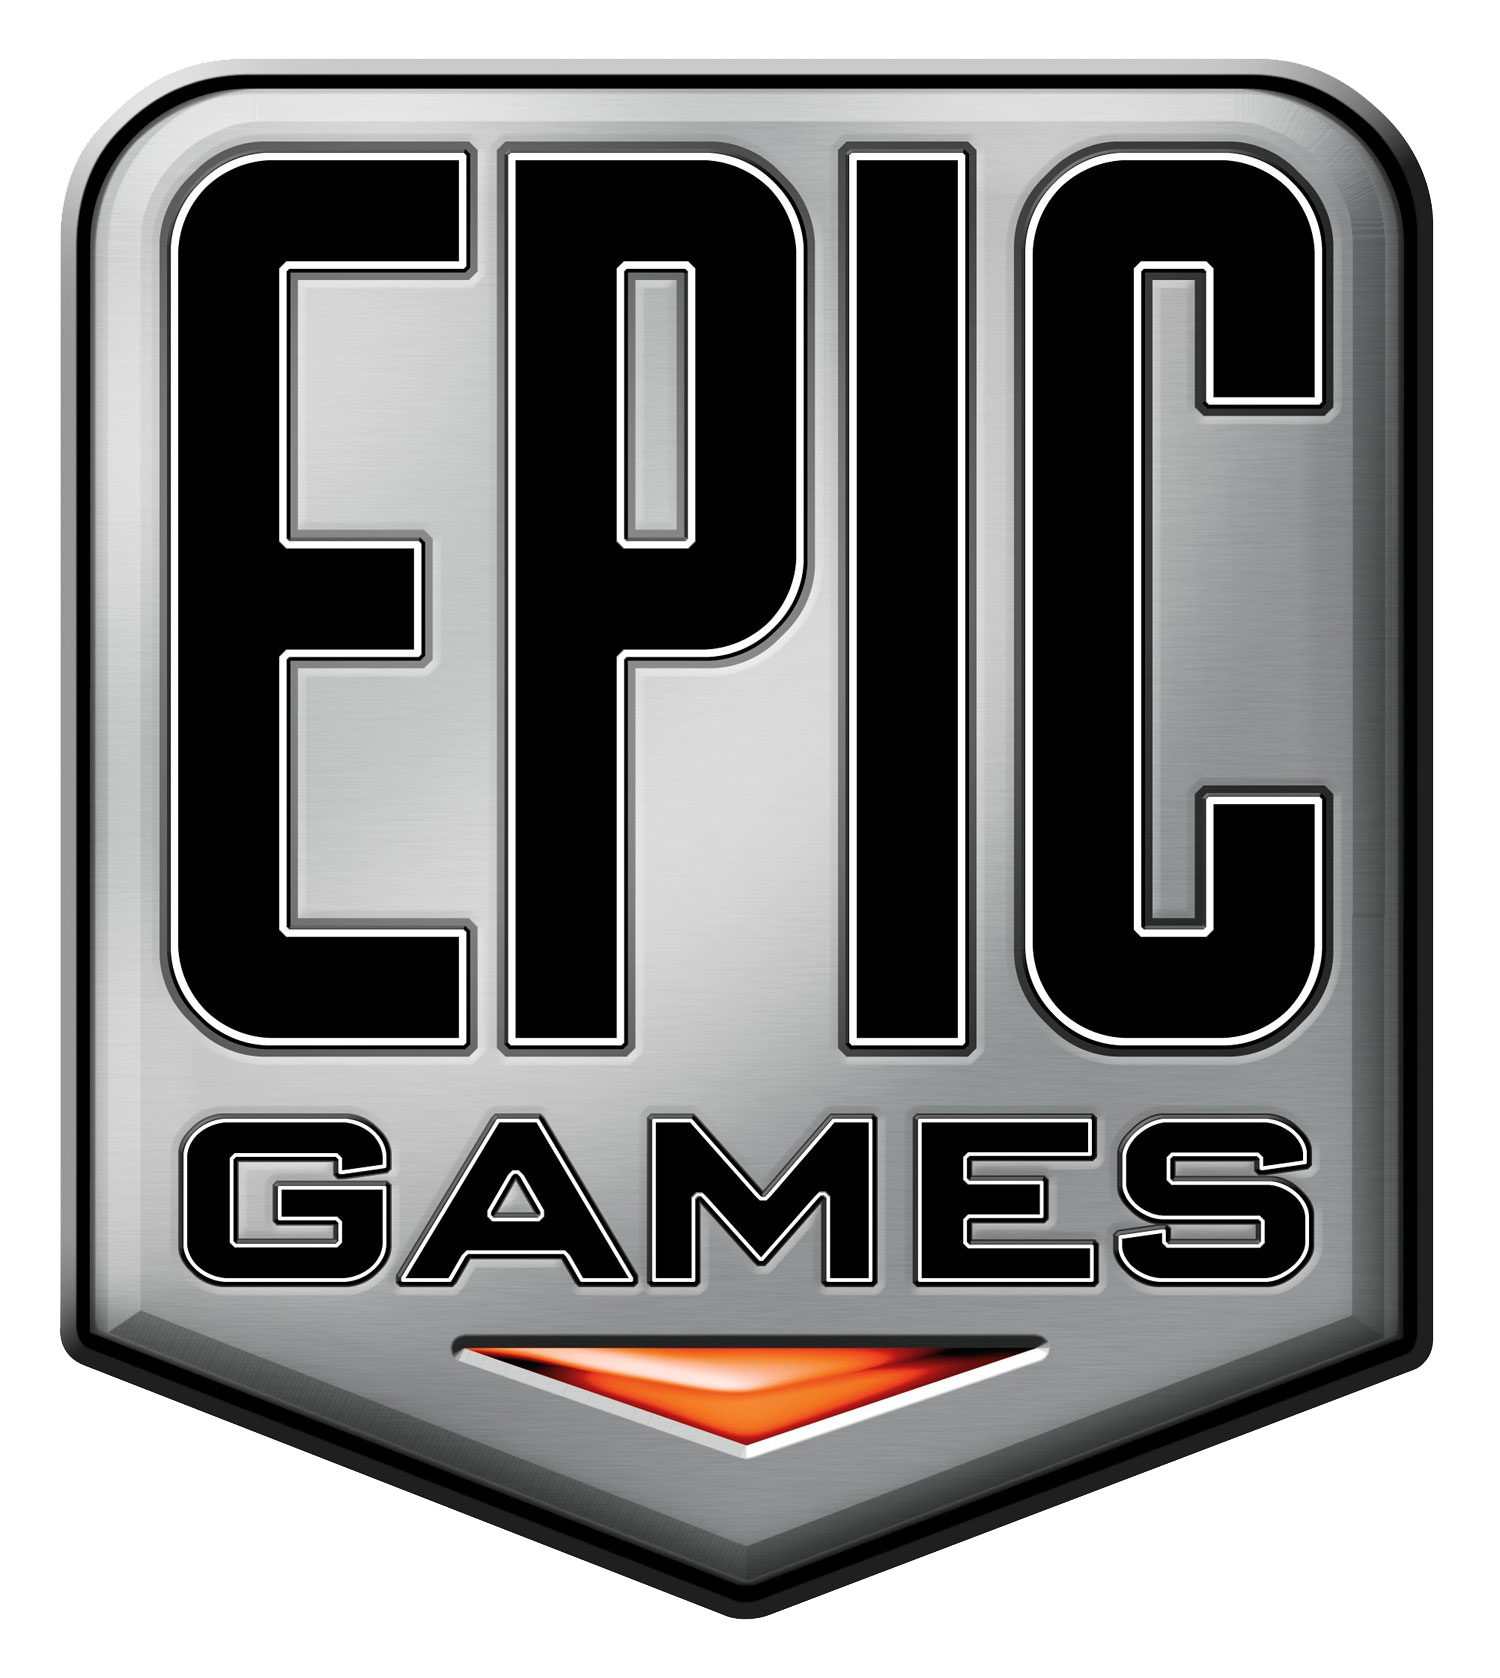 kisspng-epic-games-gears-of-war-judgment-unreal-infinity-game-logo-5acbcdf5ca8115.6089892815233059738295